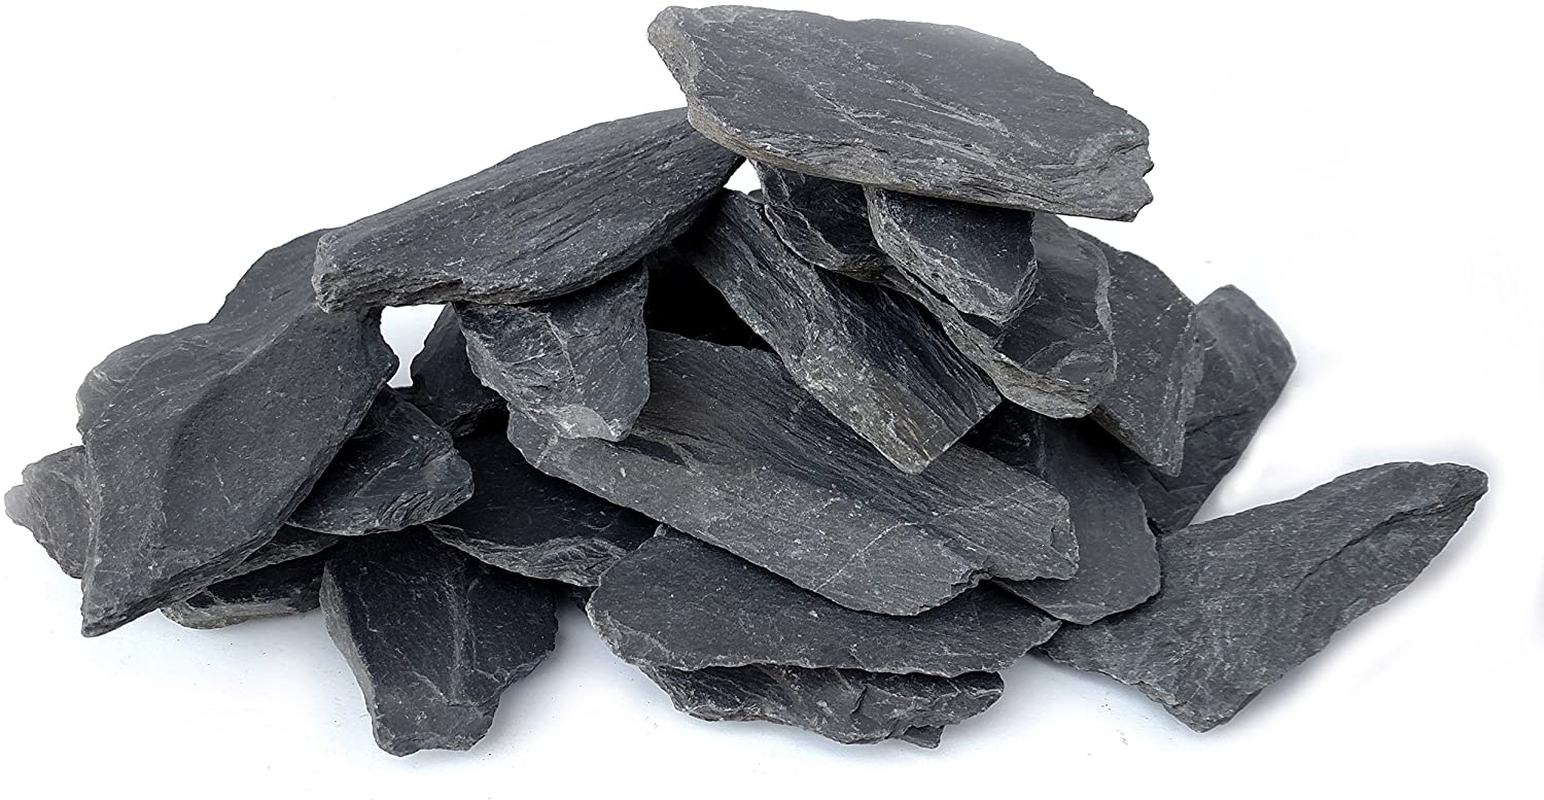 Natural Slate Stone 3 to 5 Inch Rocks for Miniature and Fairy Garden, Aquascaping Aquariums, Reptile Enclosures & Model Railroad Animals & Pet Supplies > Pet Supplies > Fish Supplies > Aquarium Decor Small World Slate & Stone 5 Pounds  